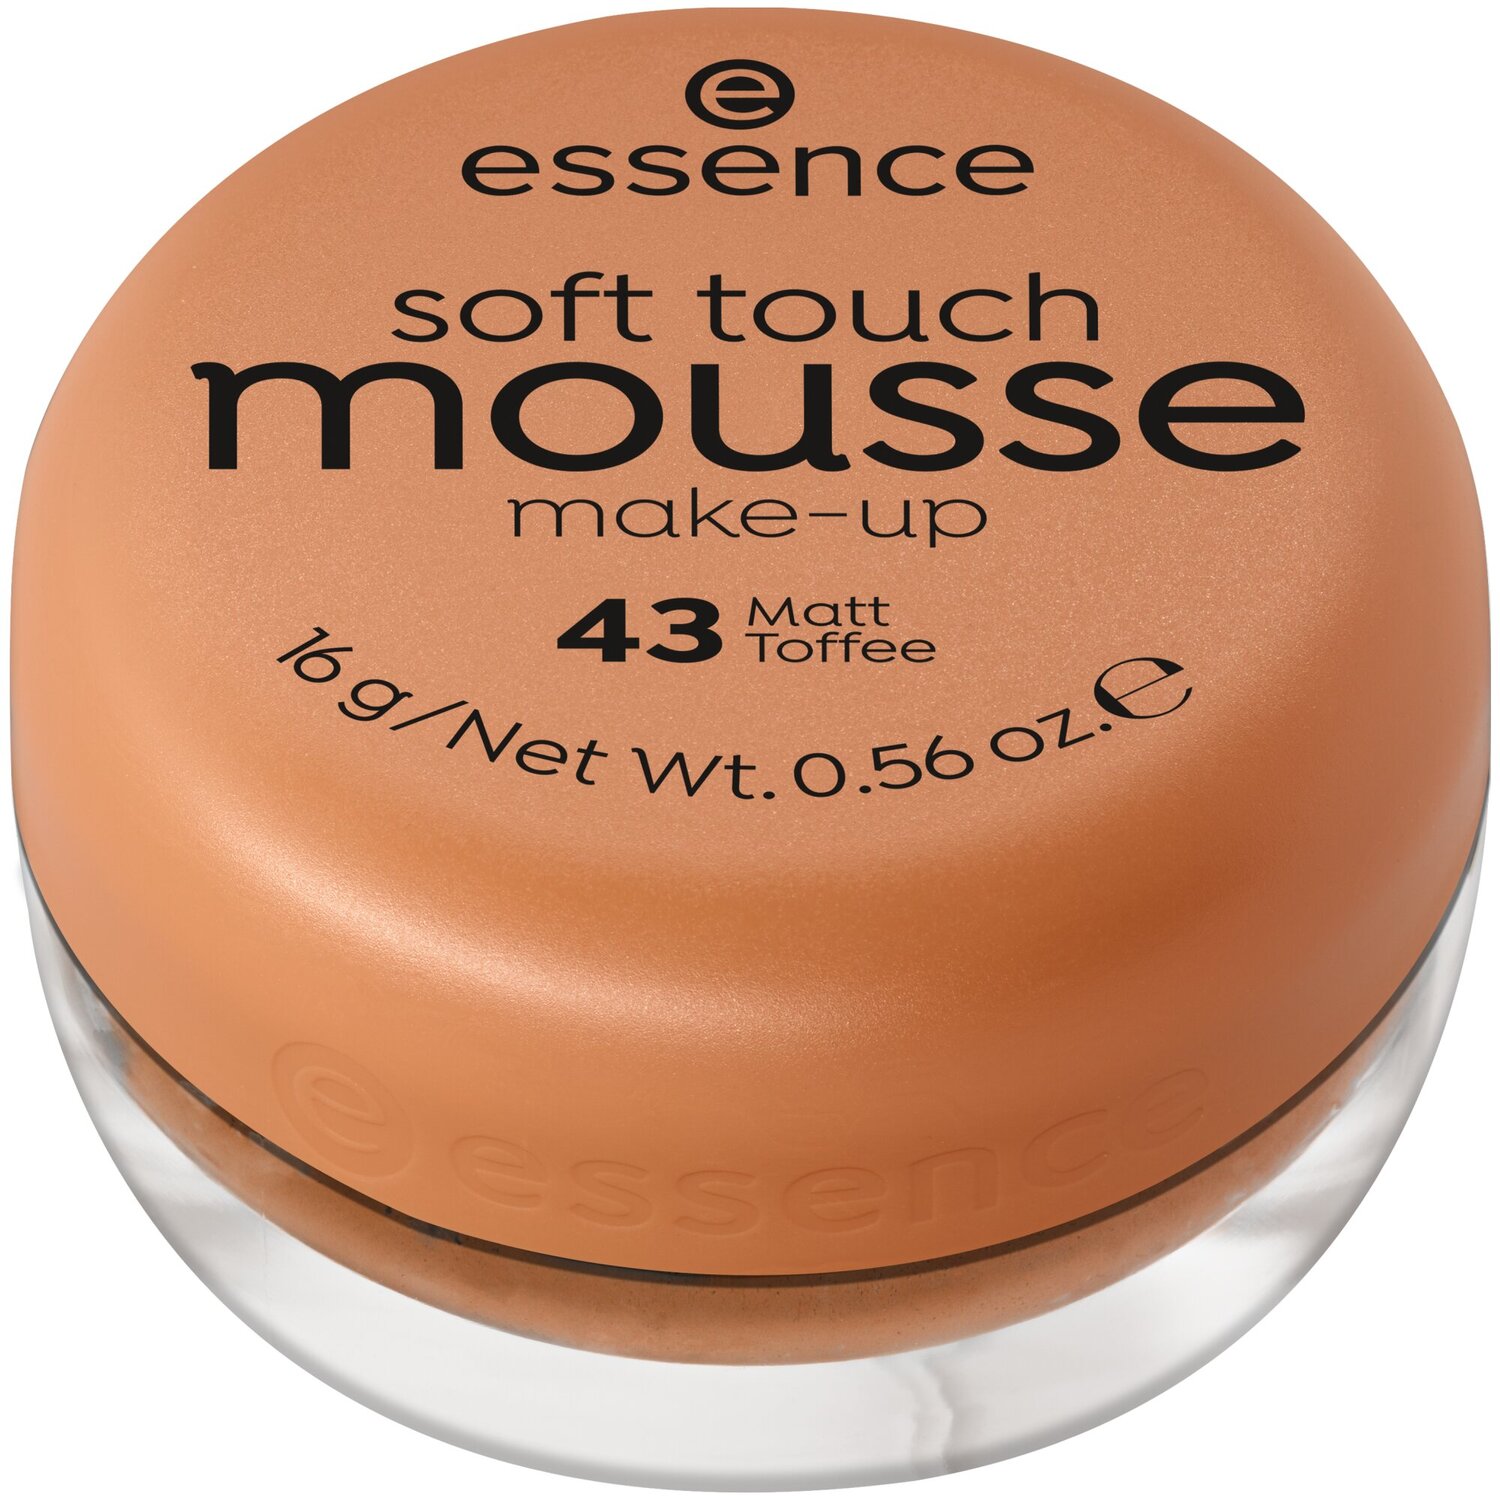 essence Soft Touch Mousse Make-Up - 43 - Matt Toffee Image 1